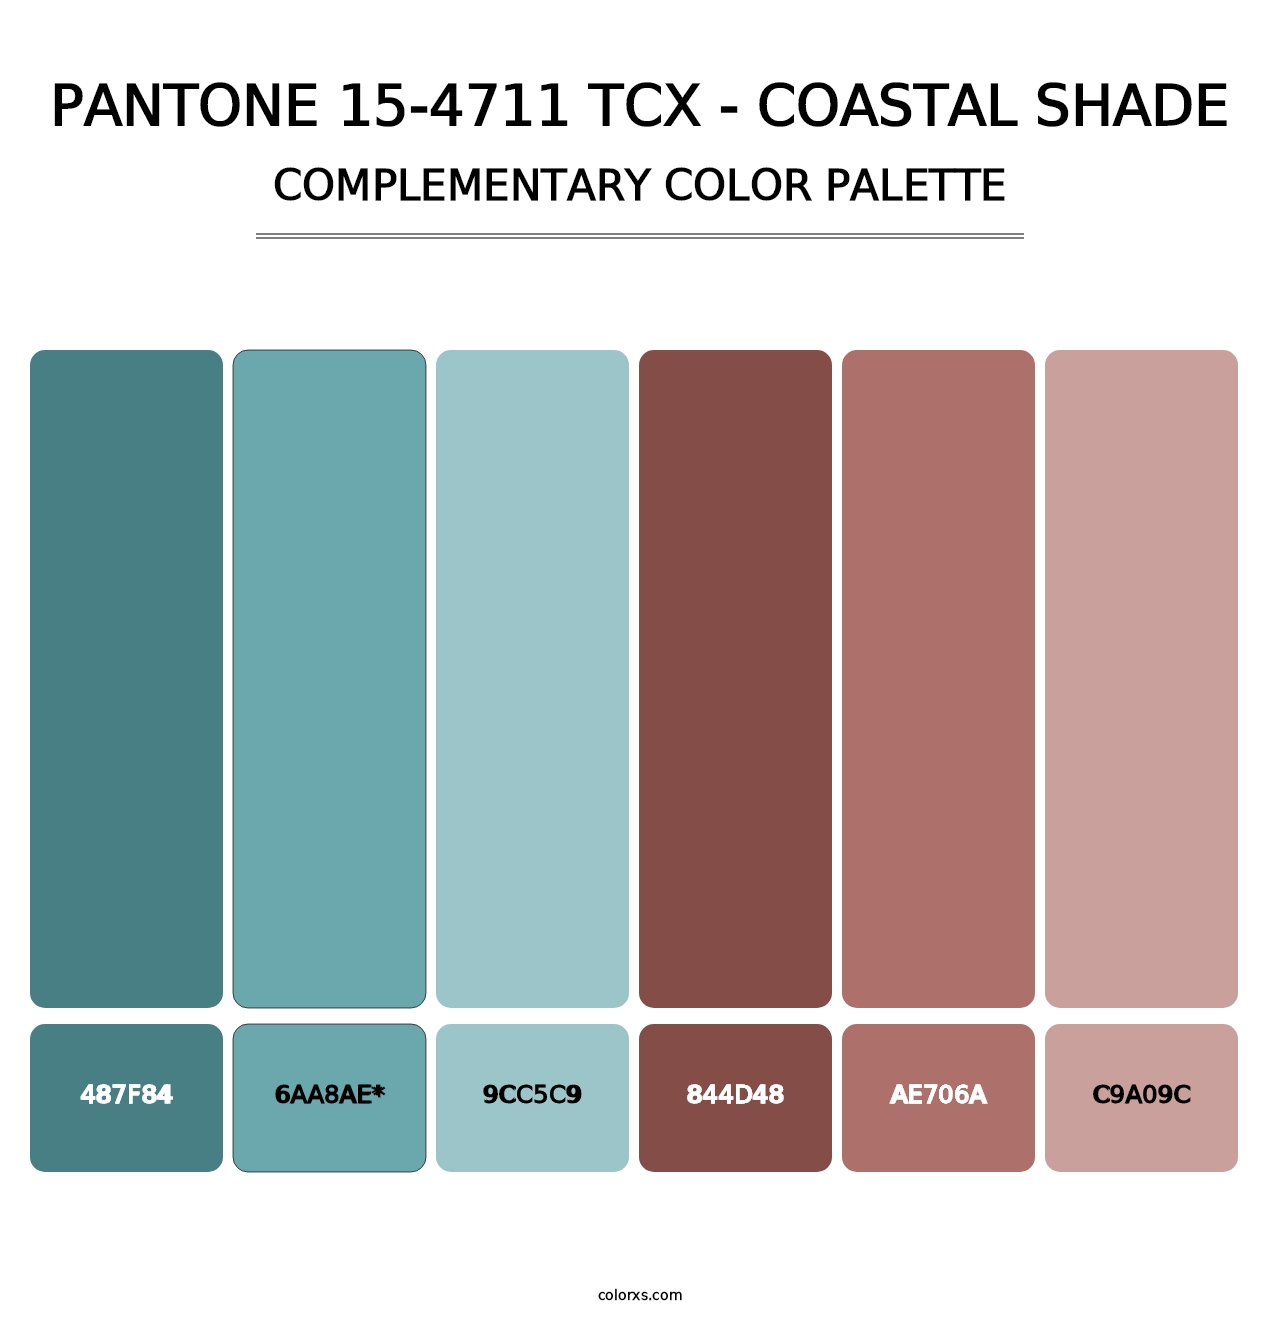 PANTONE 15-4711 TCX - Coastal Shade - Complementary Color Palette